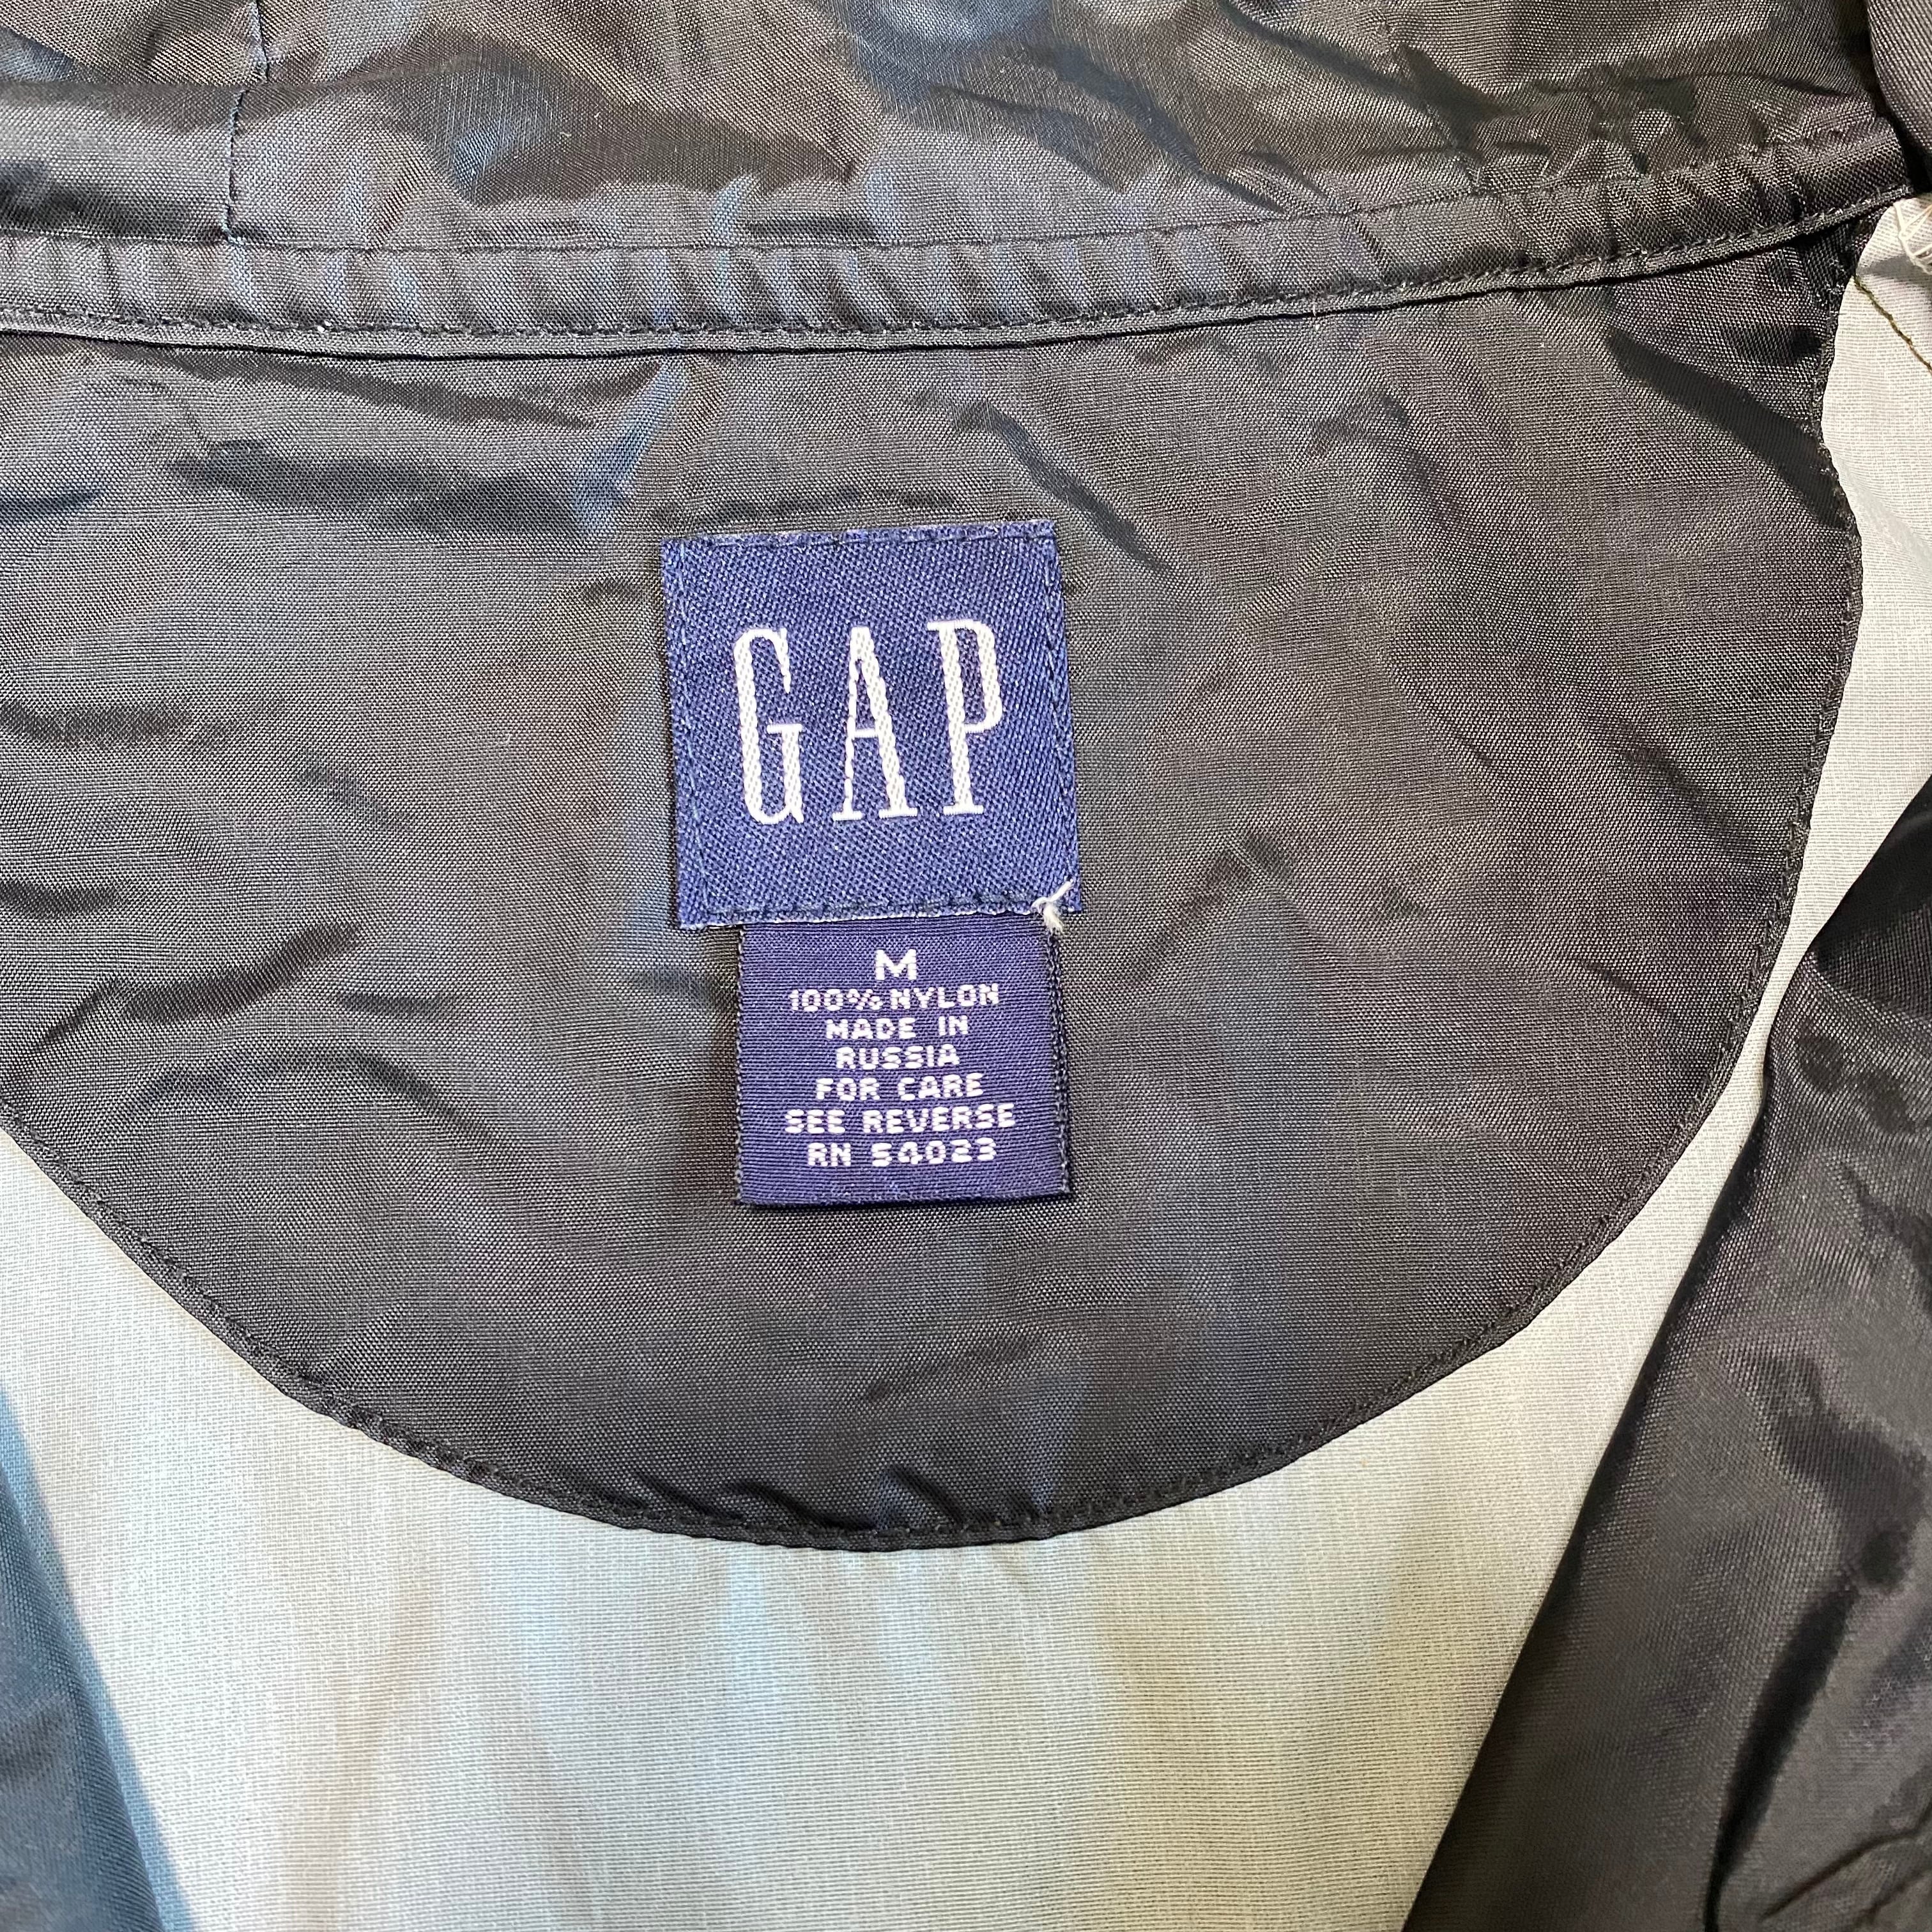 90s old gap ツートンフーディー　made in ロシア